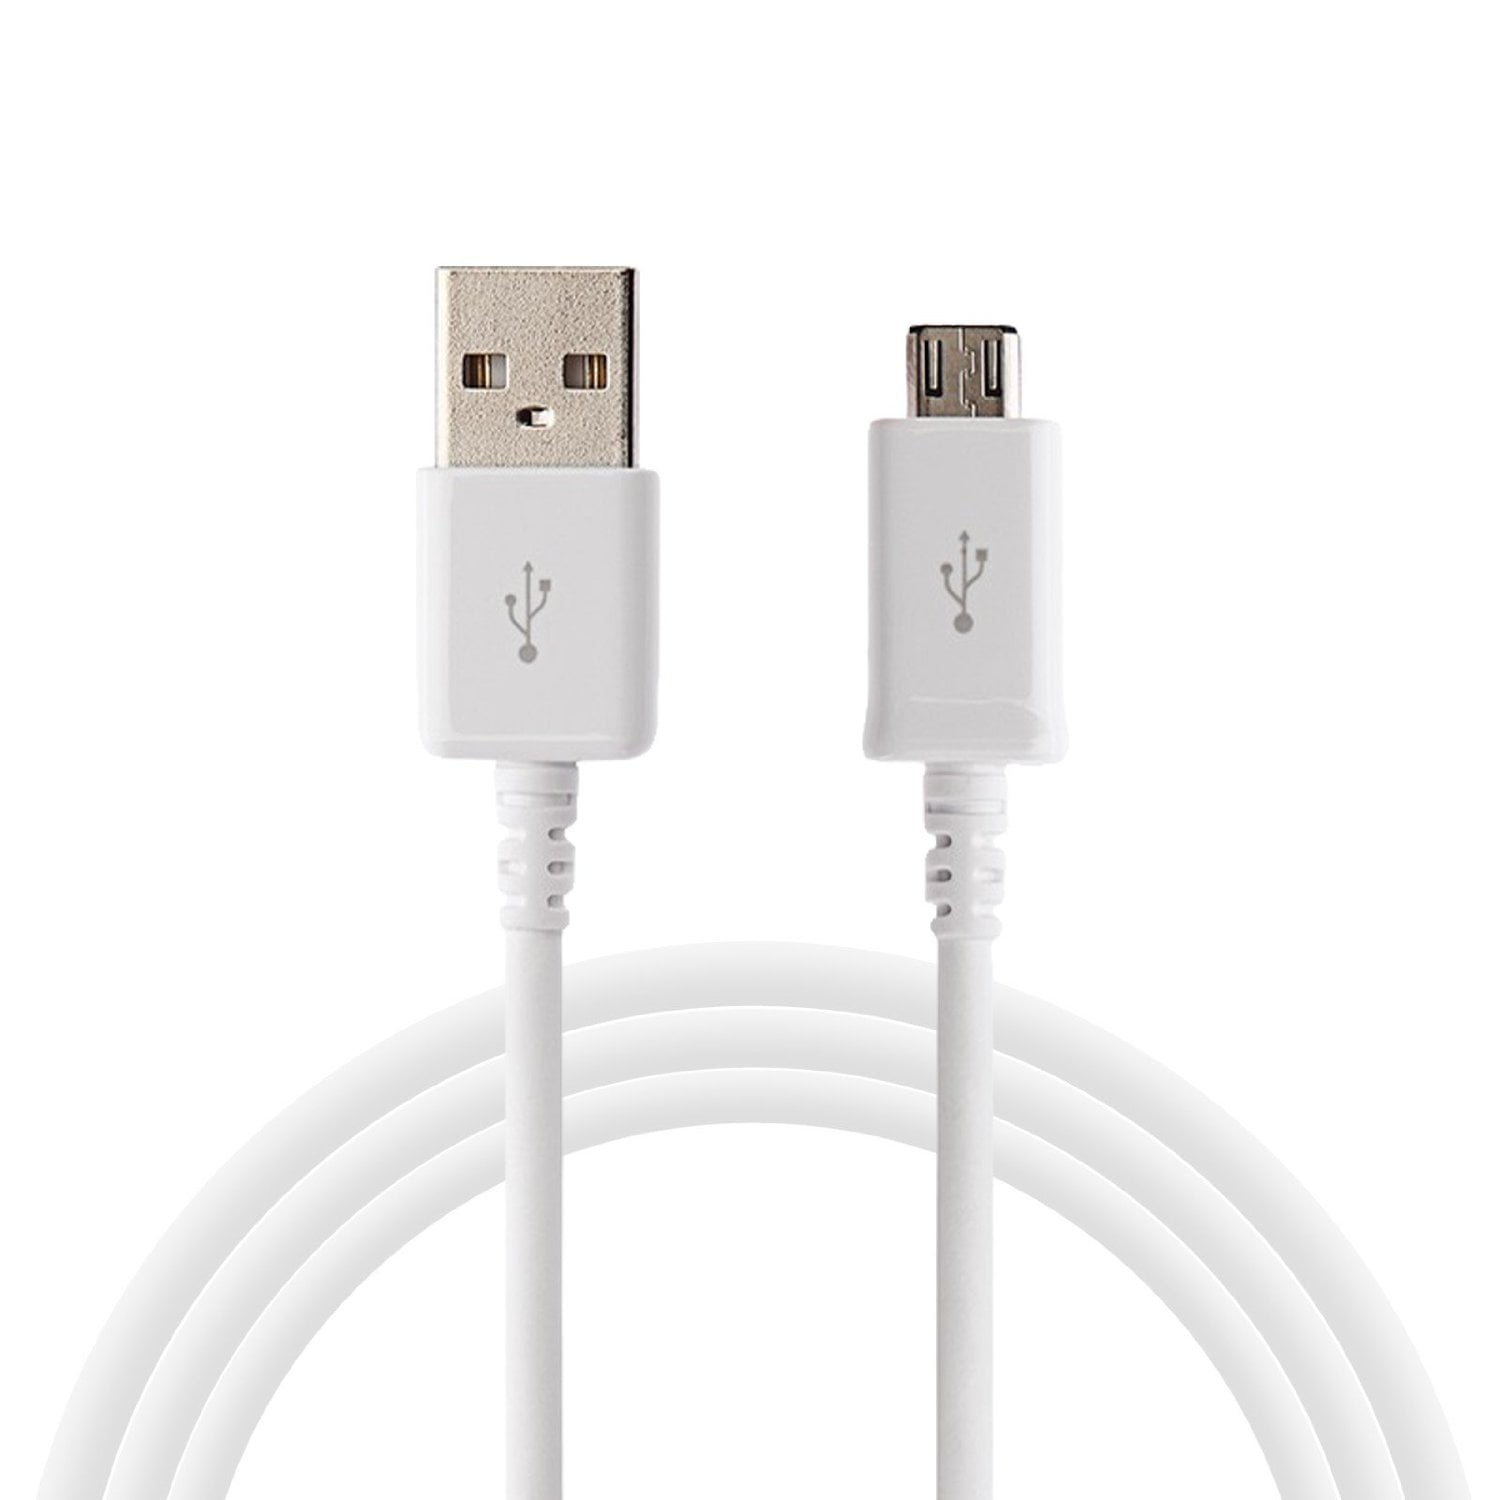 Micro USB Cable Android Charger, 2 Pack 5 ft Speed 2.0 USB A Male to Micro USB Sync Charging Cable for Samsung Galaxy S7 S6 Edge,Nexus,LG,Motorola,HTC,Sony,Nokia,PS4 Controller,White - Walmart.com